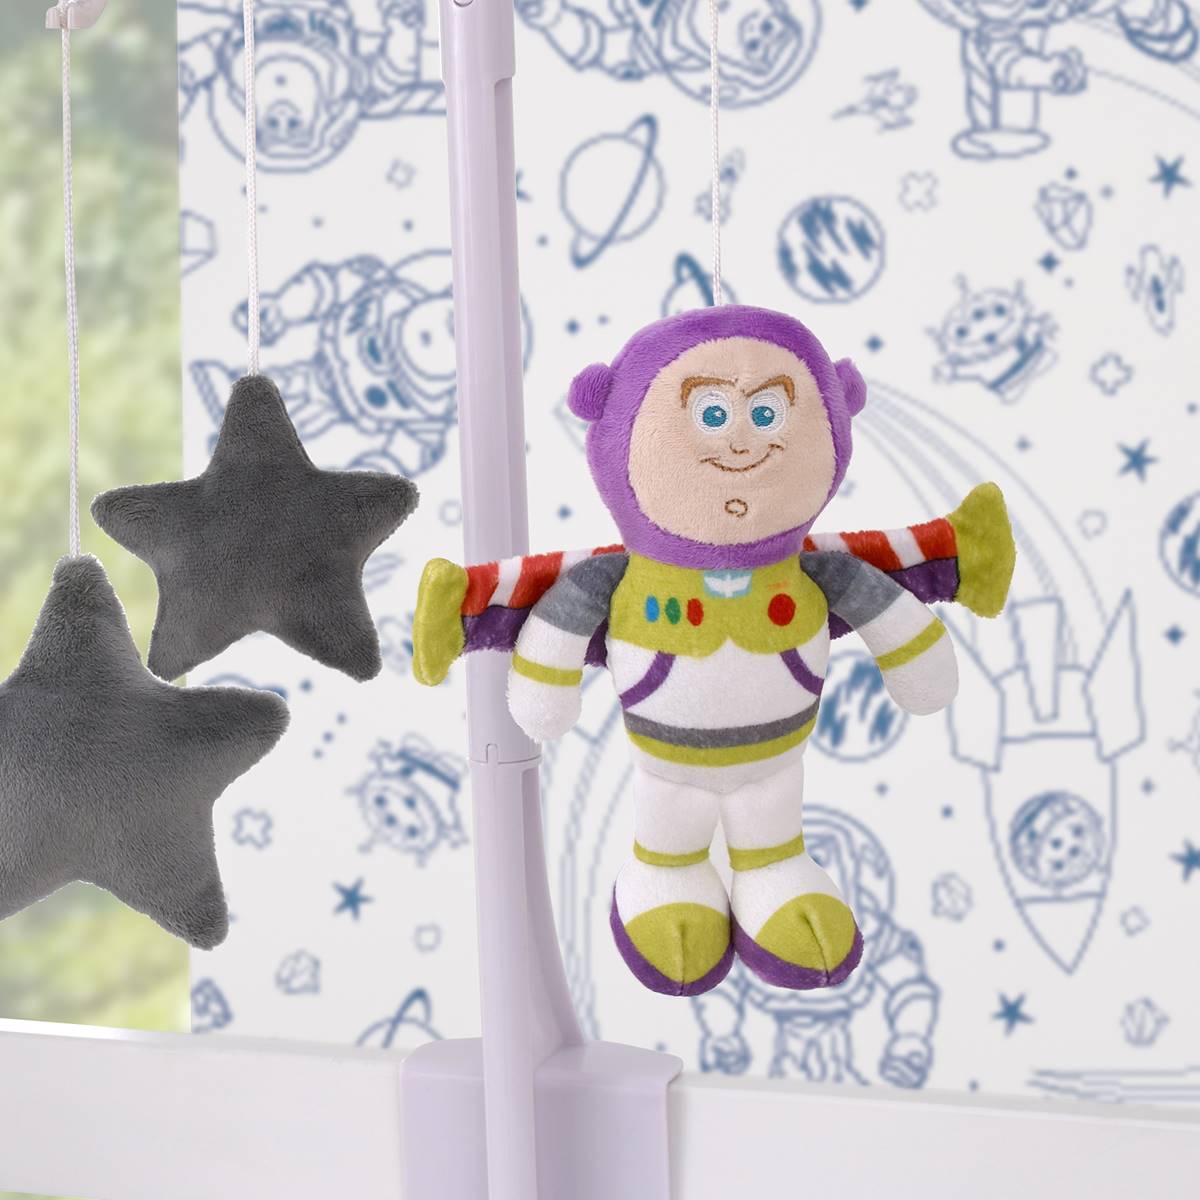 Disney Toy Story Outta This World Buzz Lightyear Musical Mobile